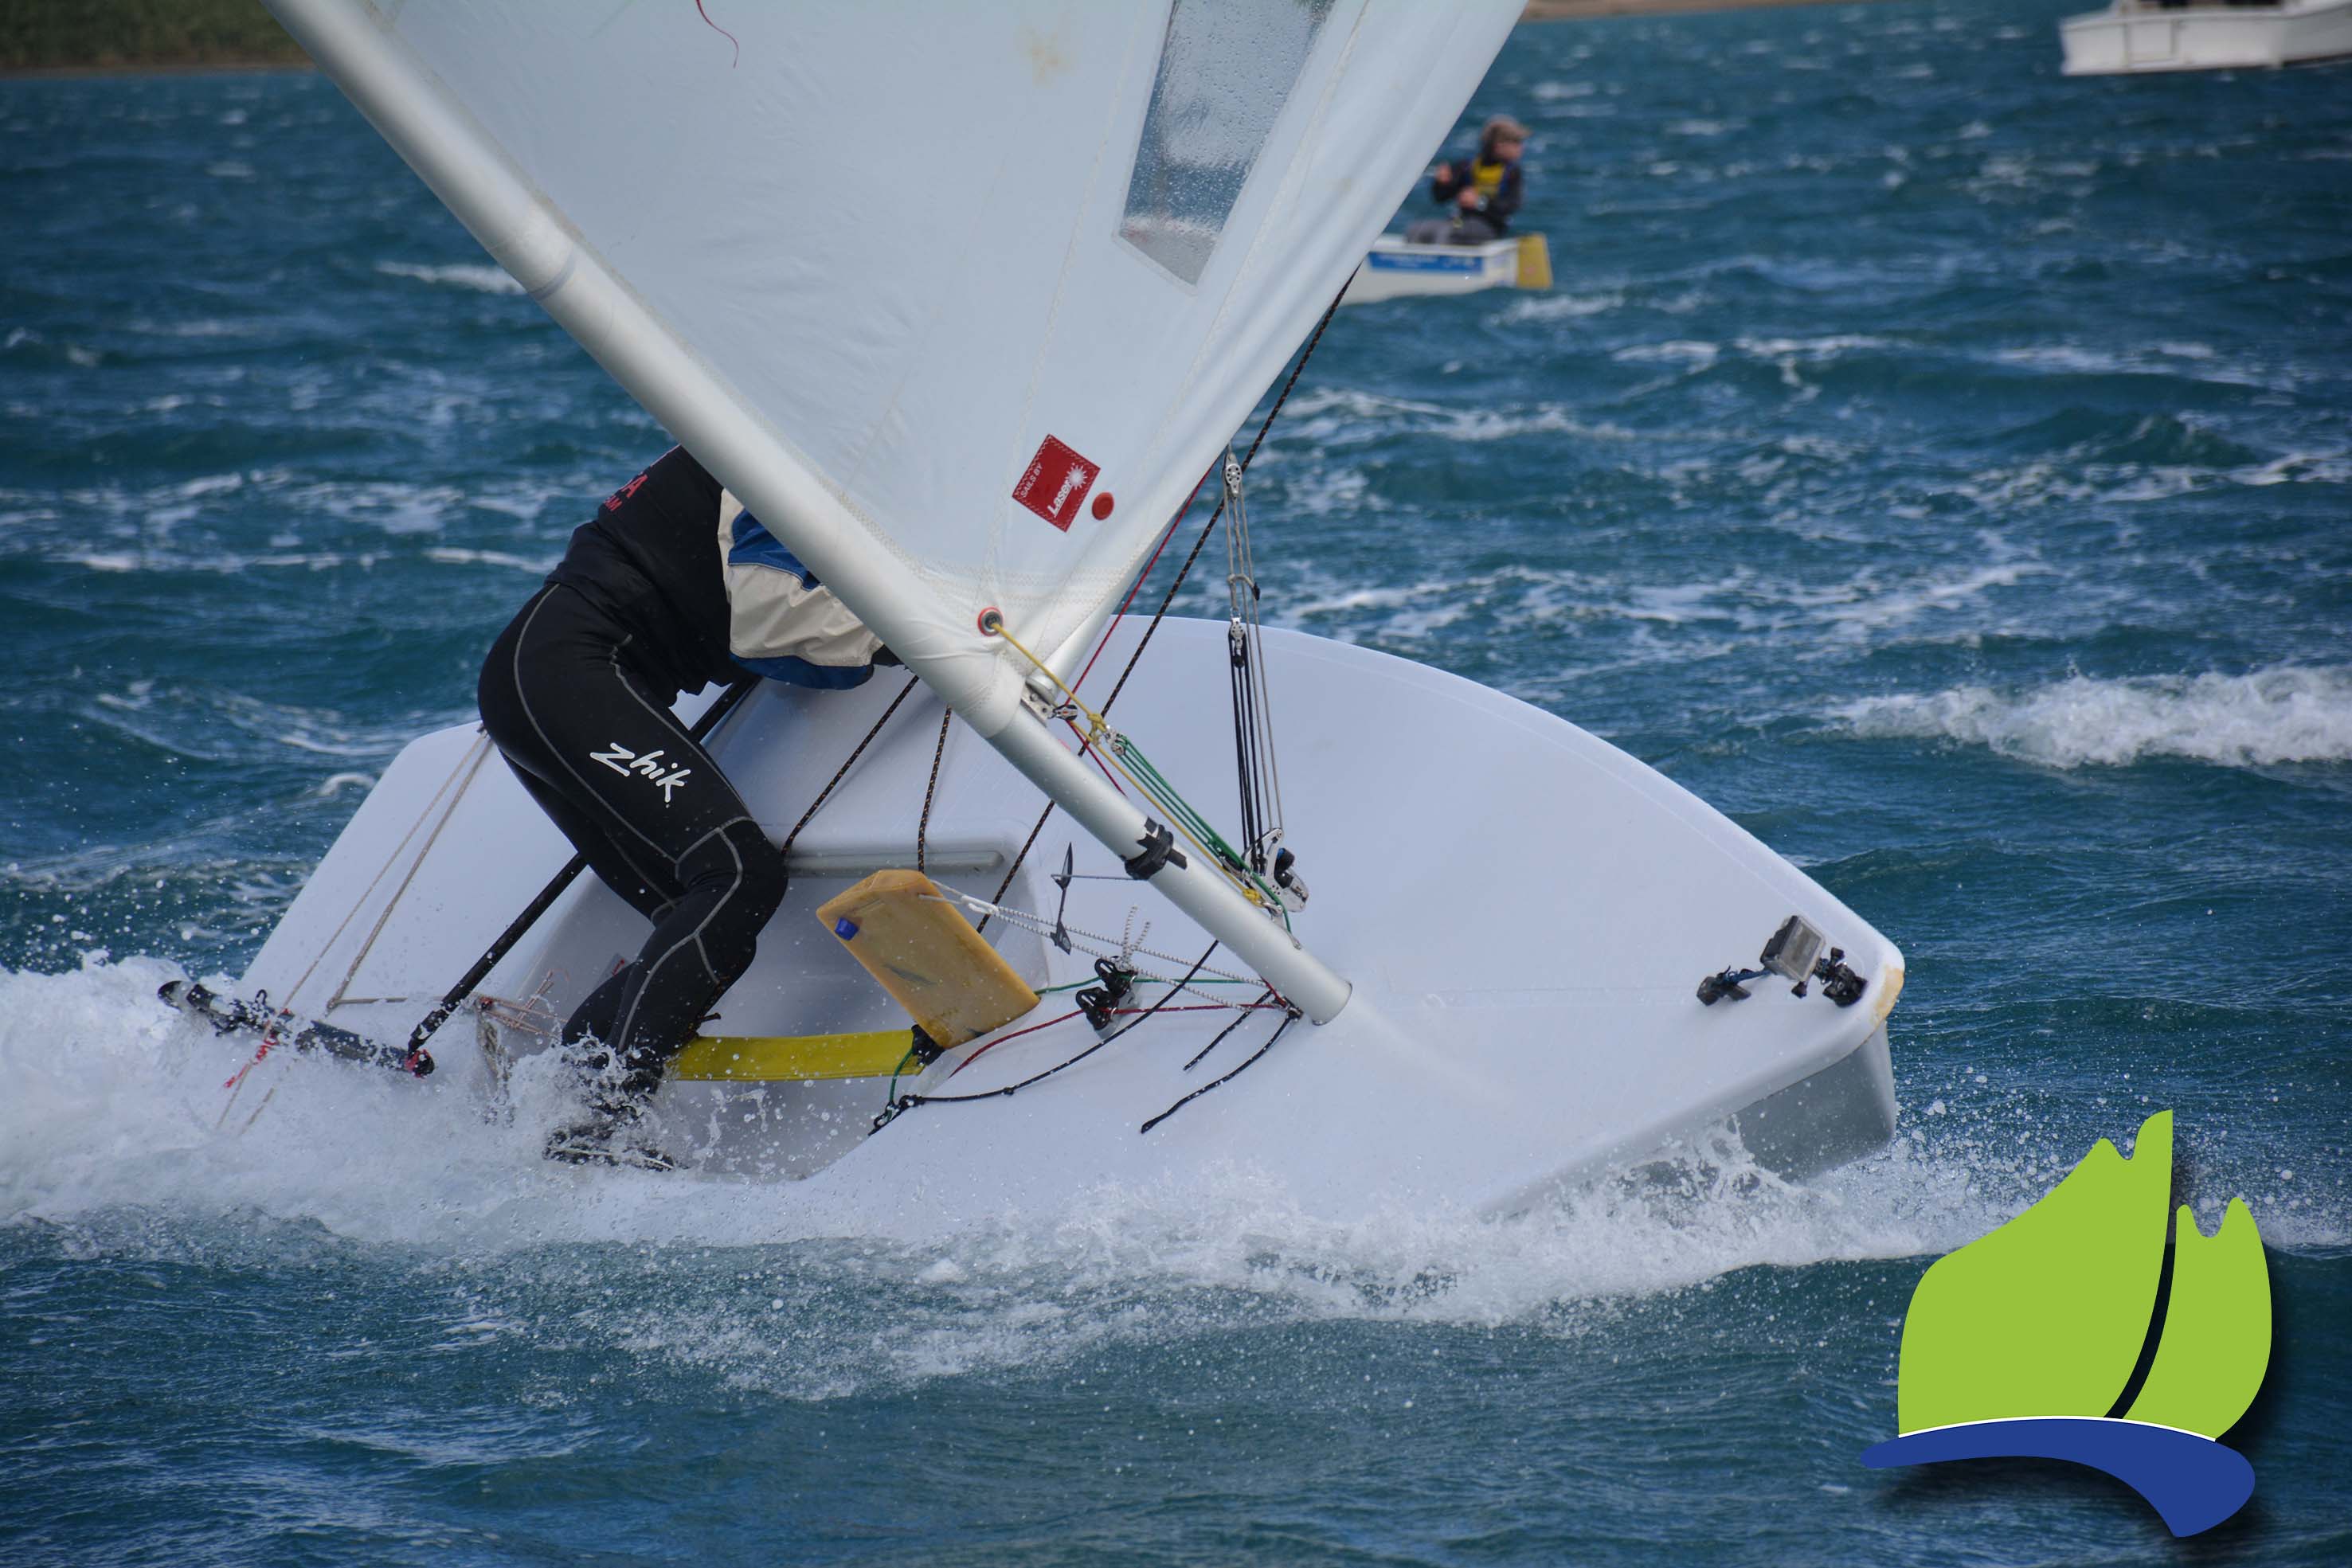 Things got hectic for laser sailor Sarah Dredge as the breeze picked up on the Sunday.